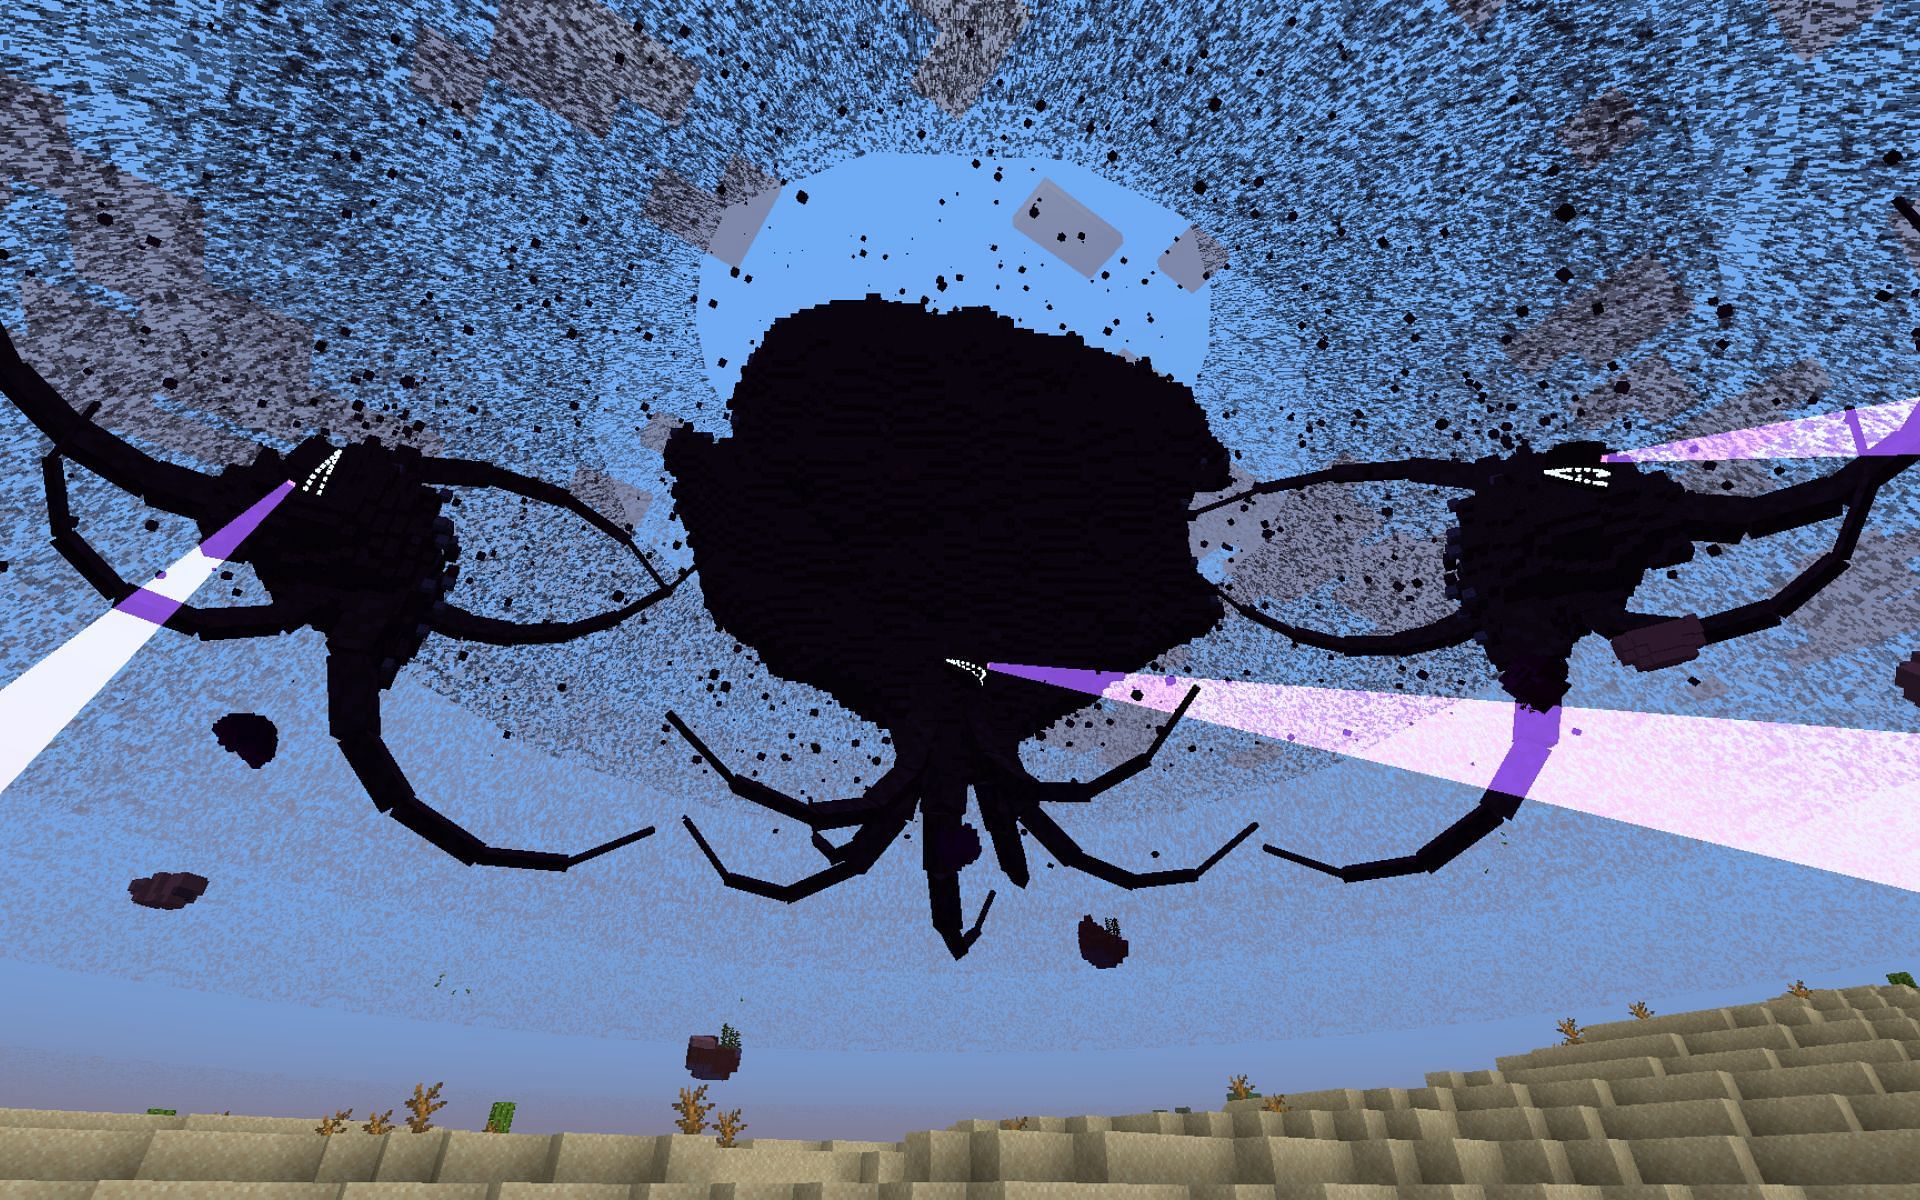 The Wither Storm, The Mods of Enderman_of_D00M Wiki